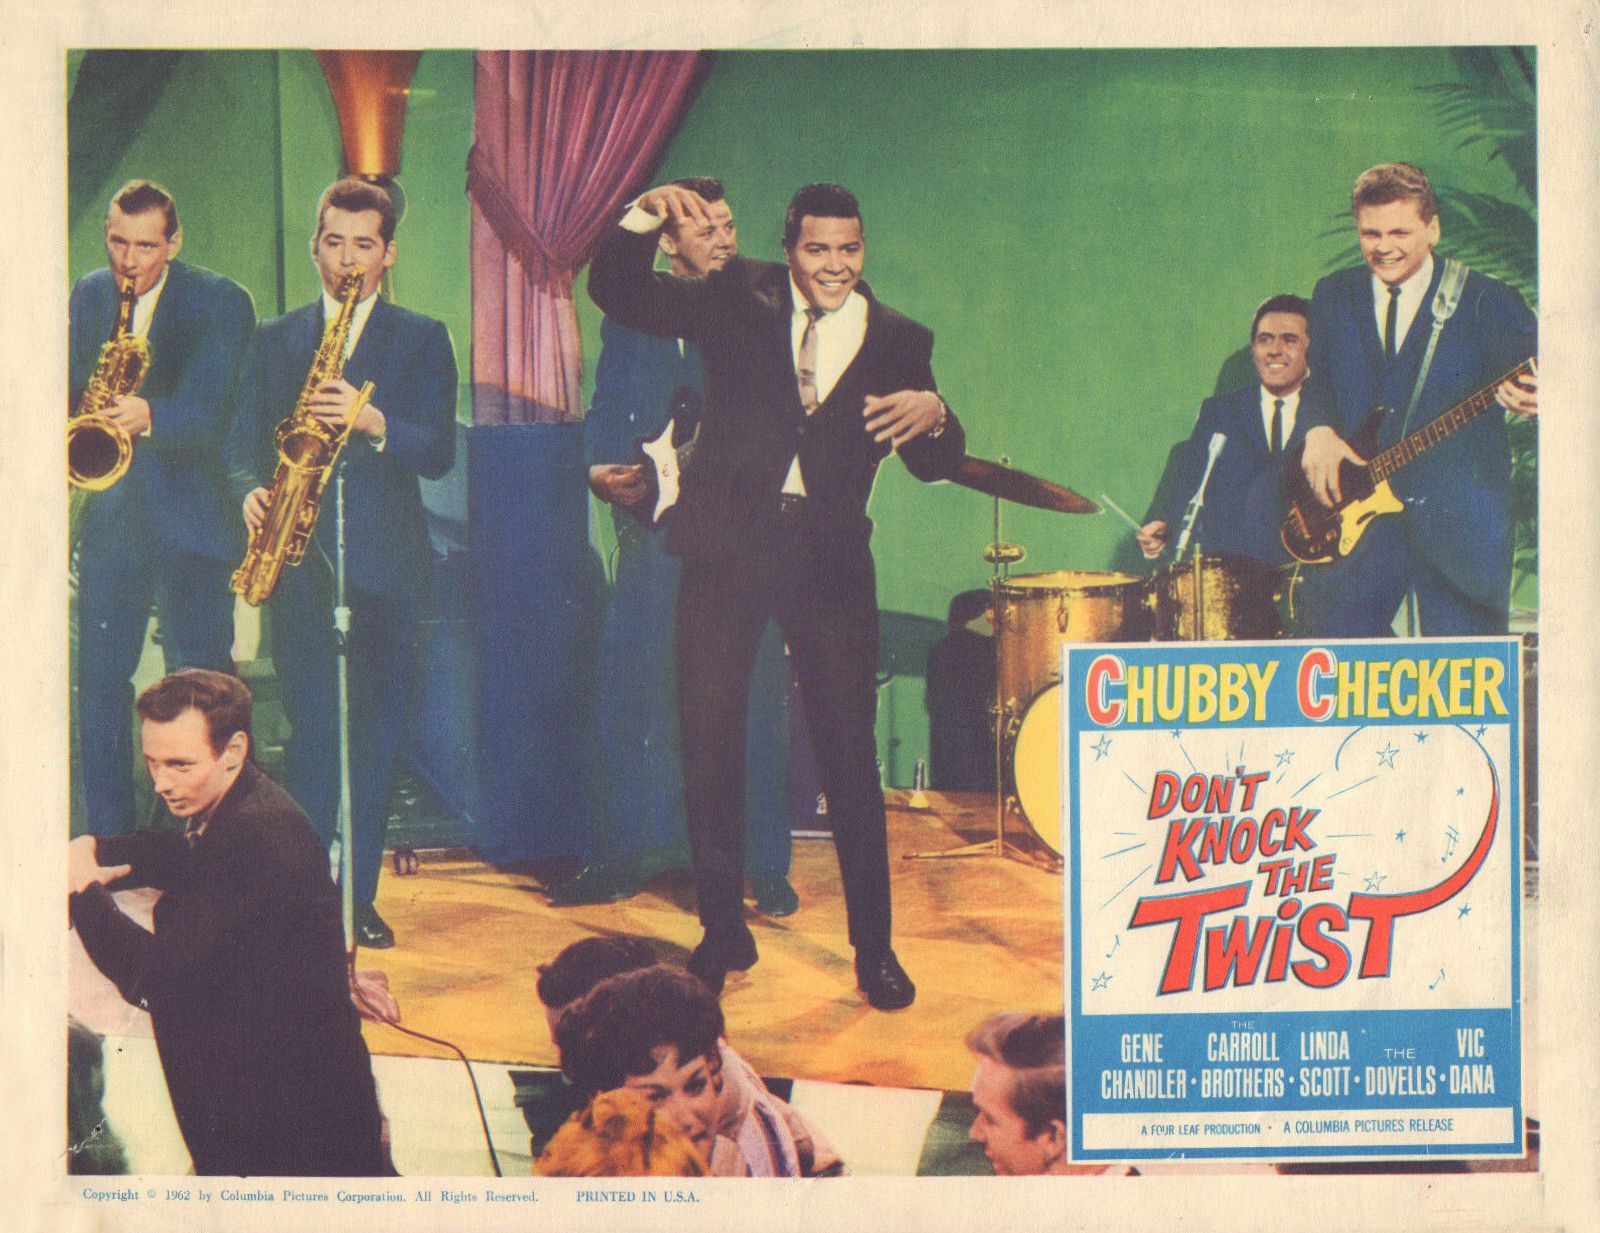 AOR-1.76 Chubby Checker Don’t Knock the Twist Lobby Card 1962 Concert Poster